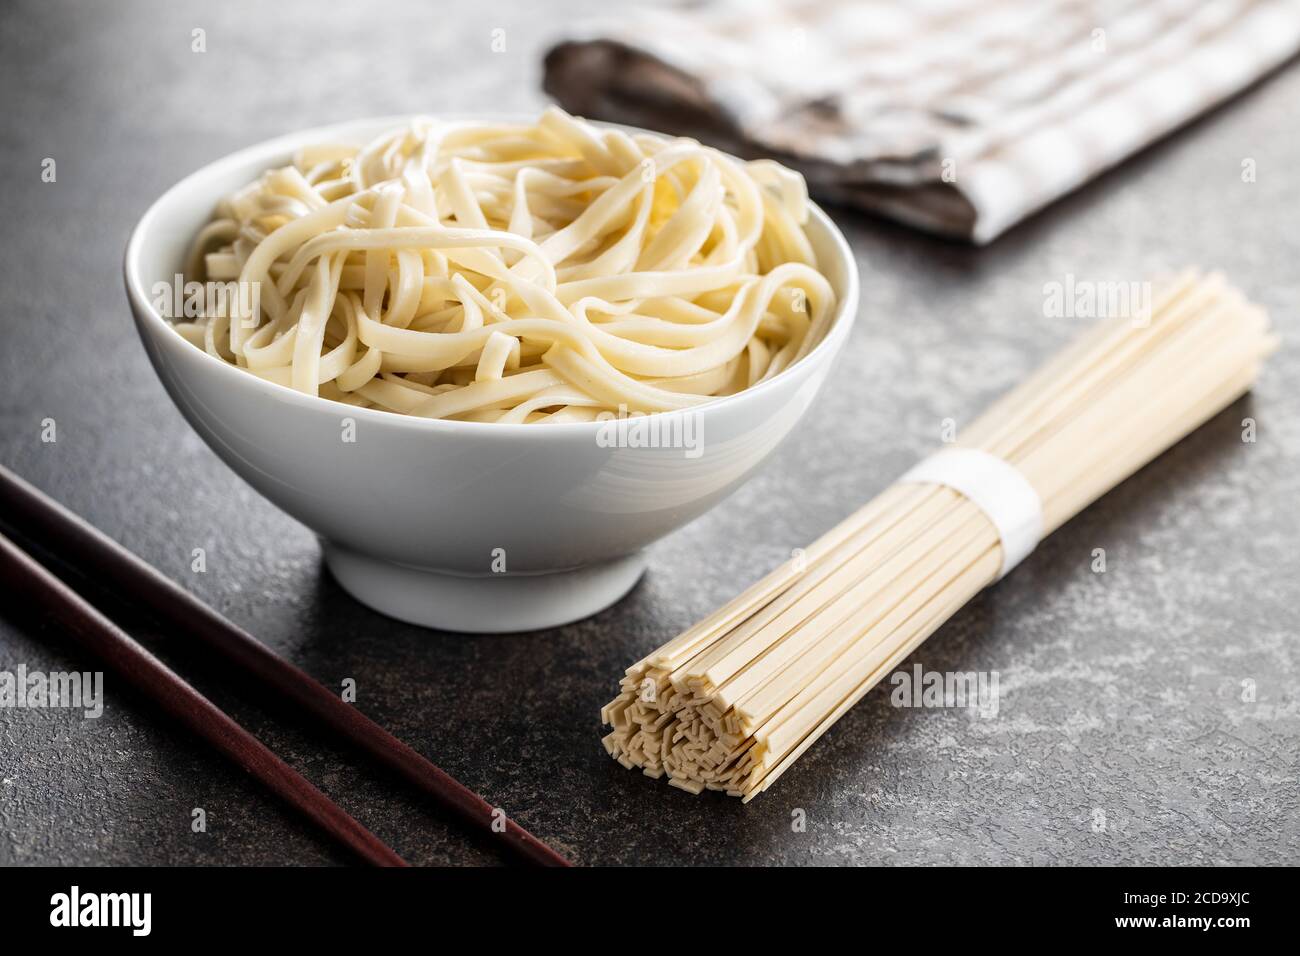 Cooked udon noodles. Traditional Japanese noodles in bowl on black table. Stock Photo